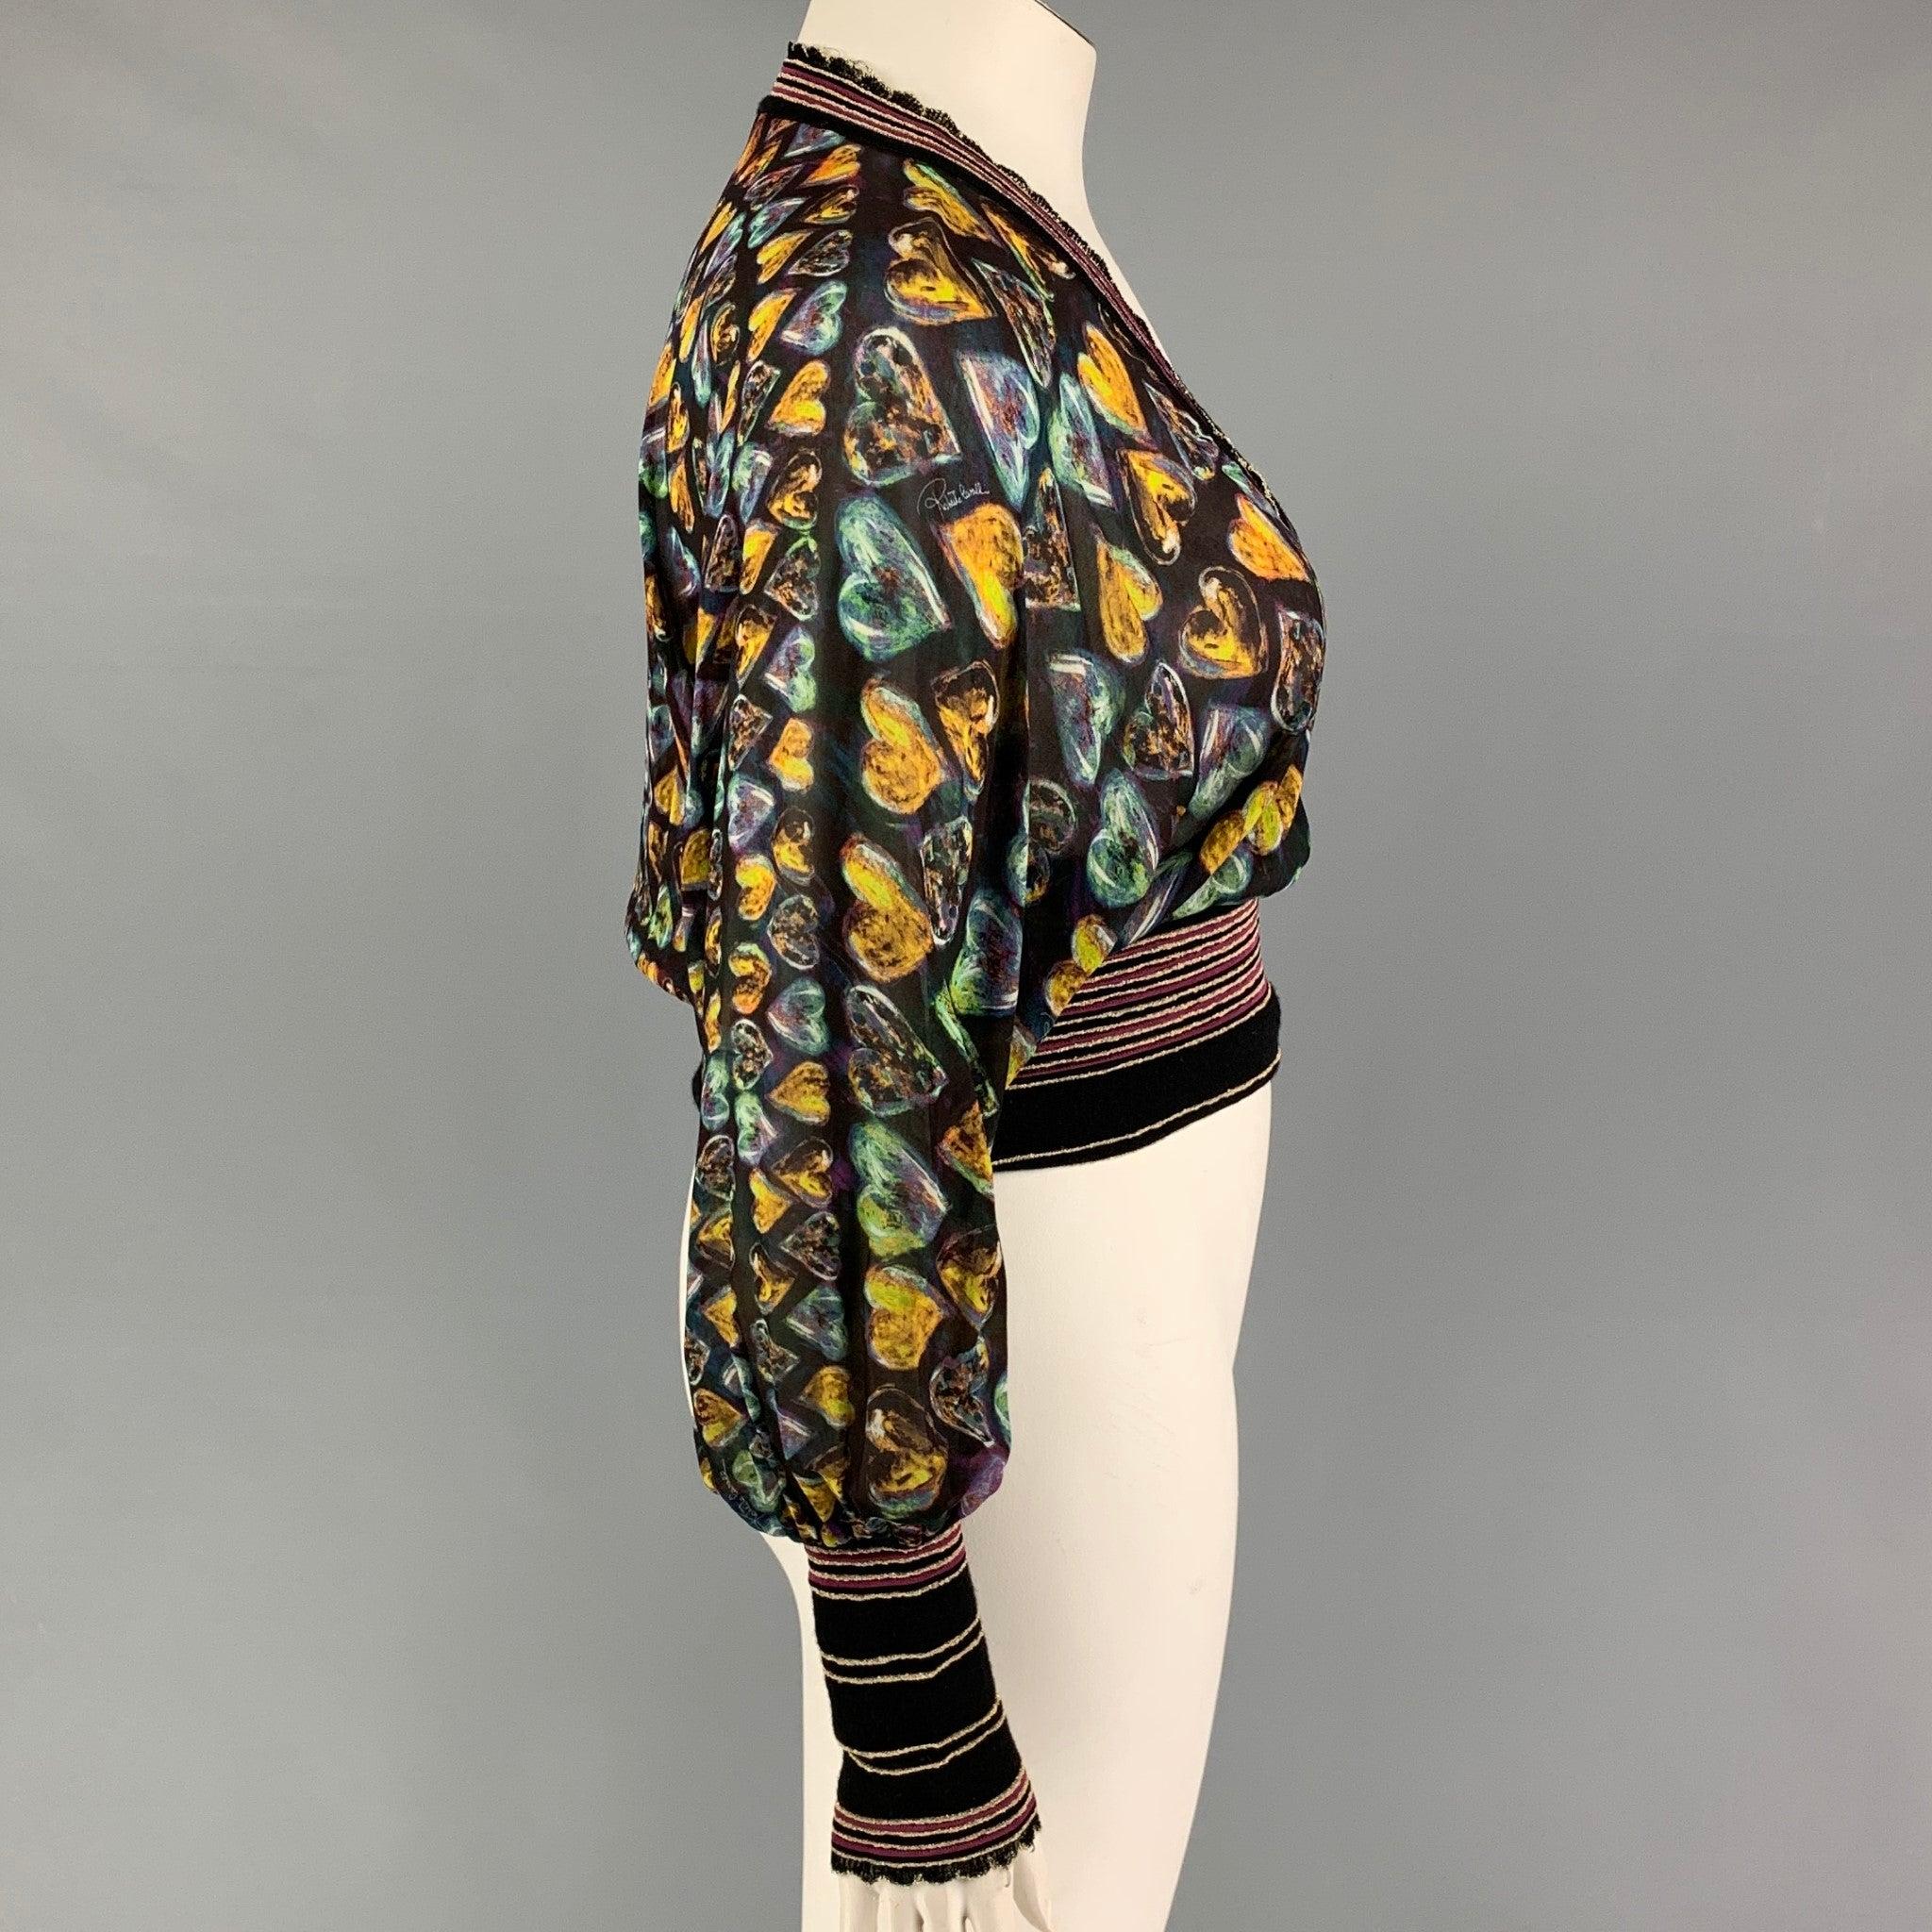 ROBERTO CAVALLI top comes in a multi-color heart print silk blend featuring a metallic stripe elastic hem design and a v-neck.
Very Good
Pre-Owned Condition. 

Marked:   44 

Measurements: 
 
Shoulder: 16 inches  Bust: 42 inches Sleeve: 25 inches 